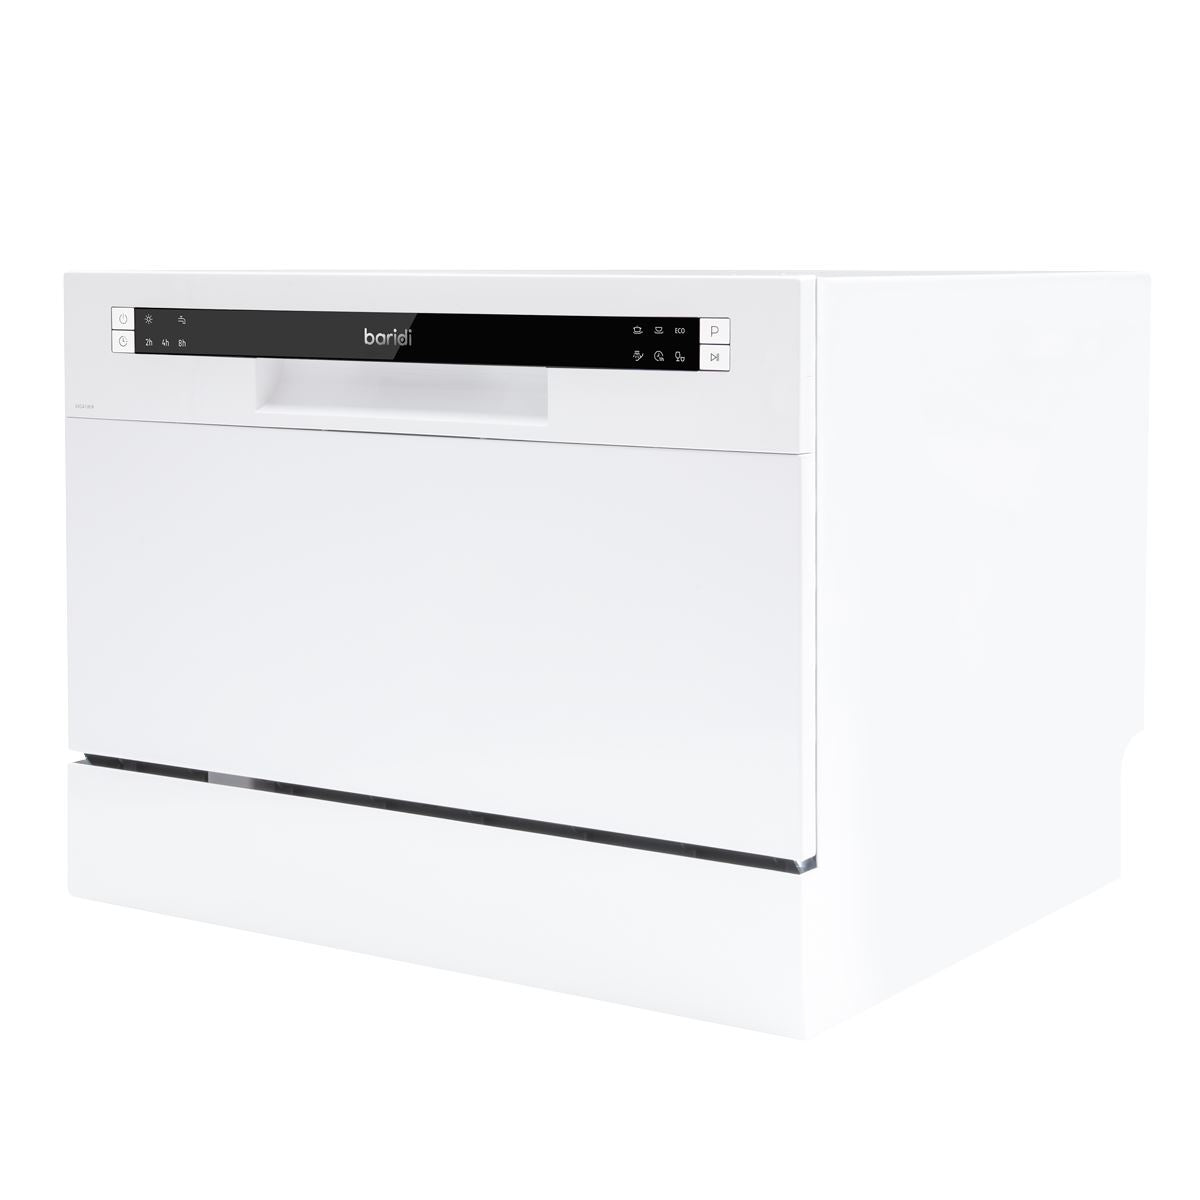 Baridi Compact Tabletop Dishwasher 6 Place Settings, 6 Programmes, Low Noise, 6.5L Cycle, Start Delay - White